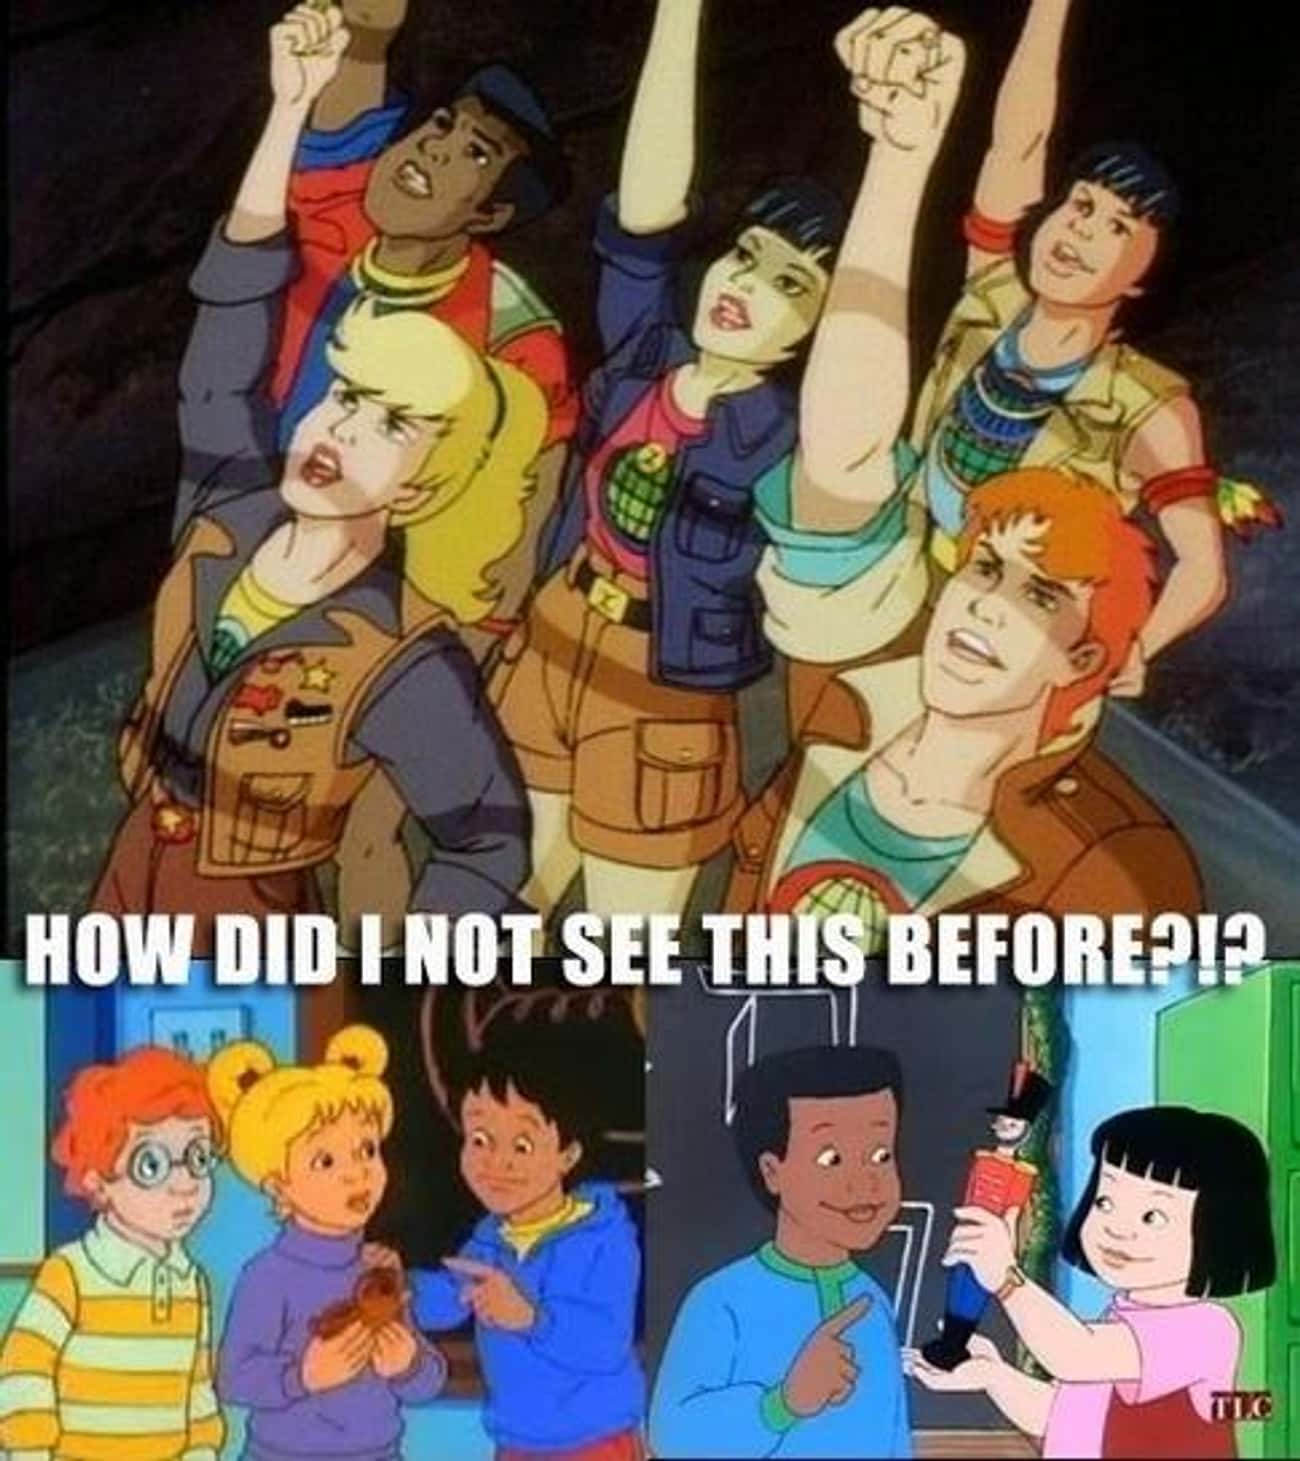 The Kids from The Magic School Bus Grew Up to Be the Planeteers